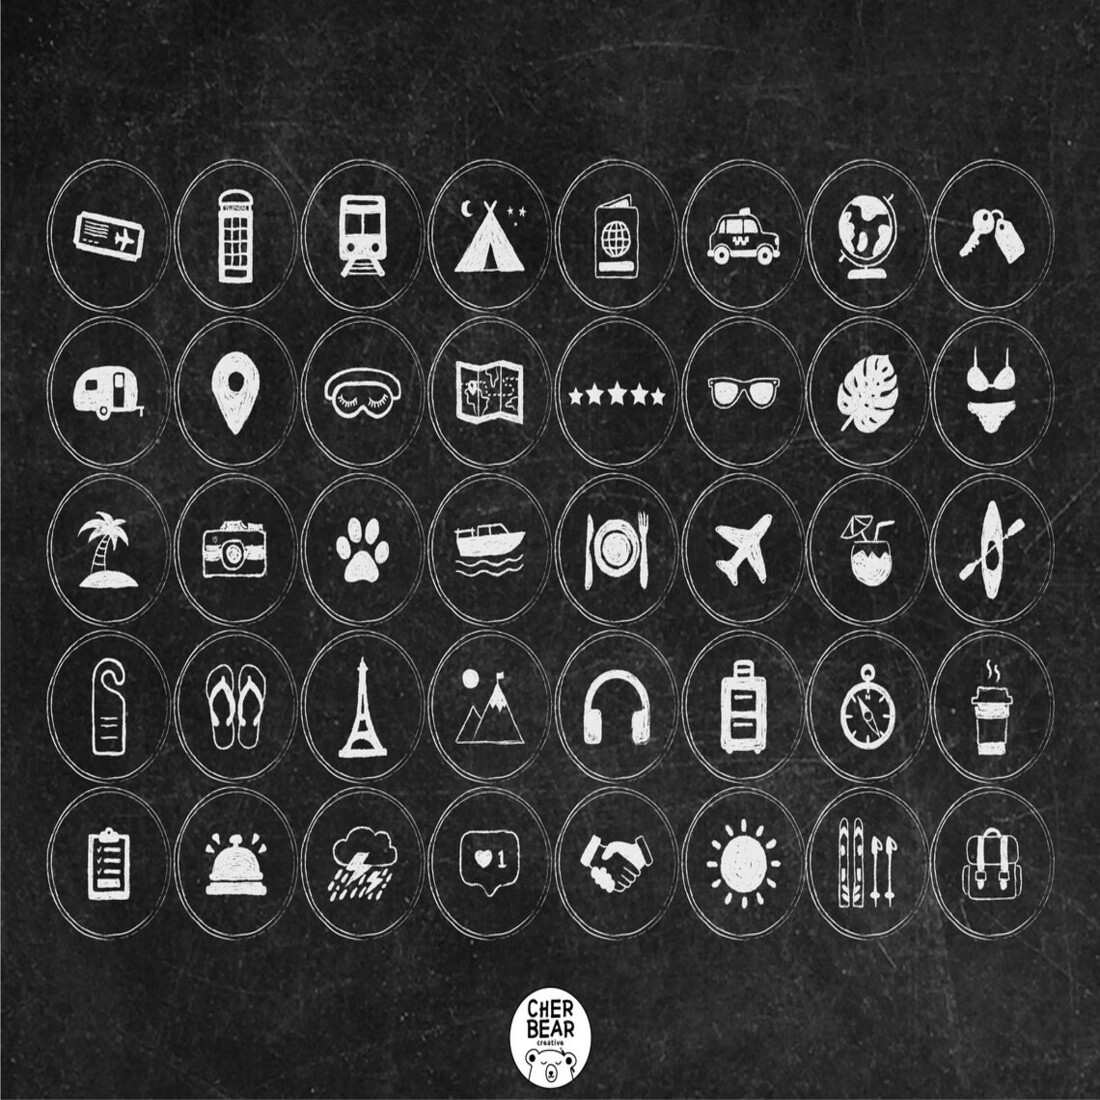 Instagram Travel Chalkboard (40 Story Highlight Covers Icons) facebook image.